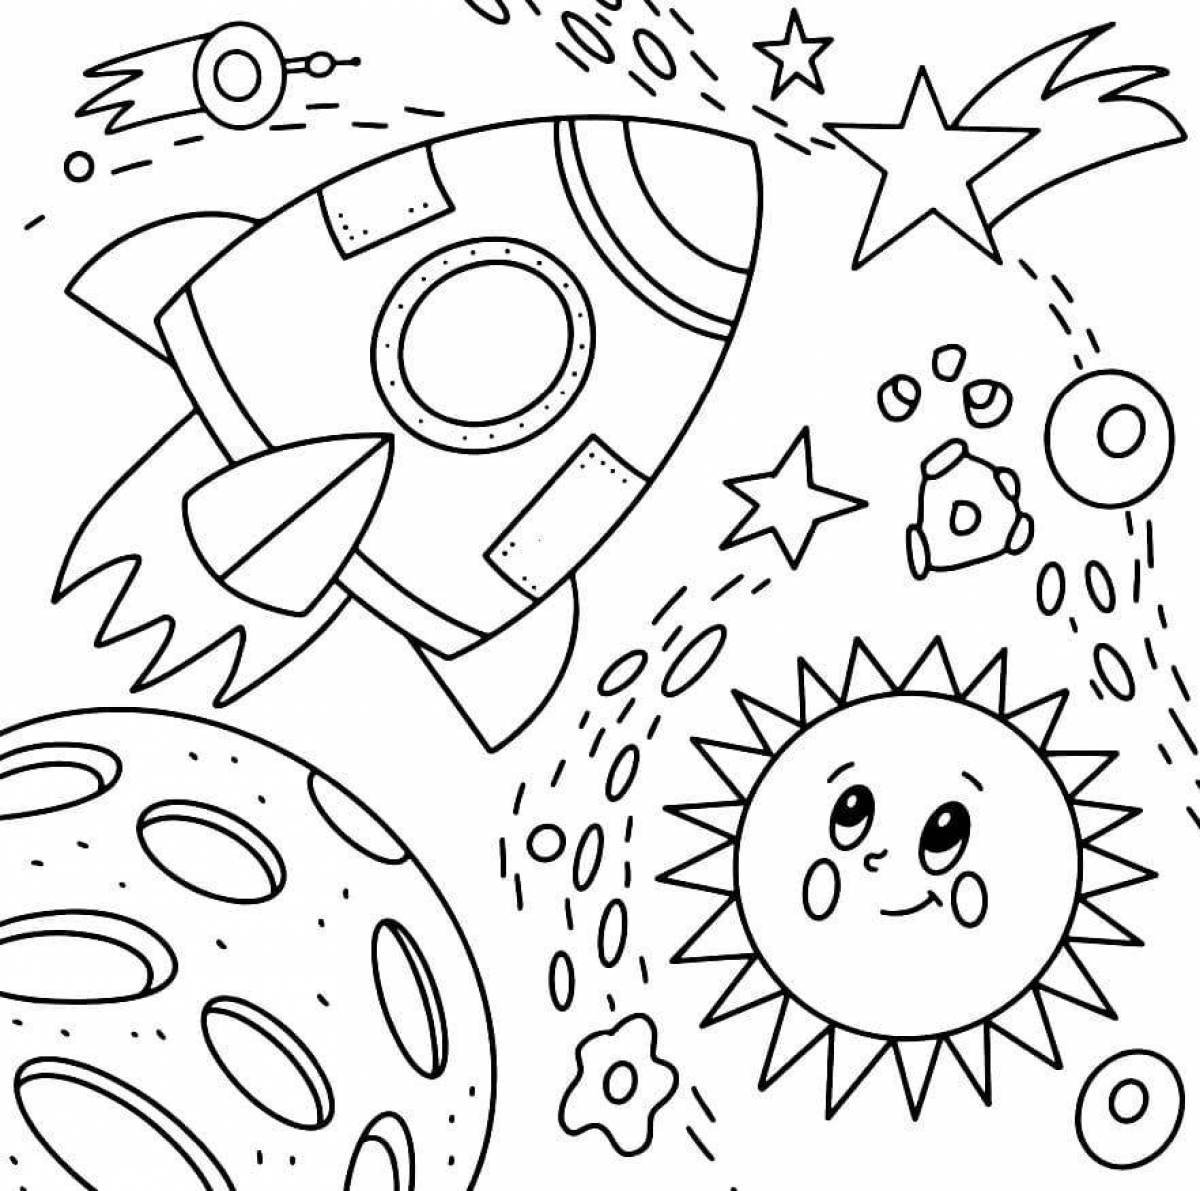 Sweet rocket coloring book for children 6-7 years old